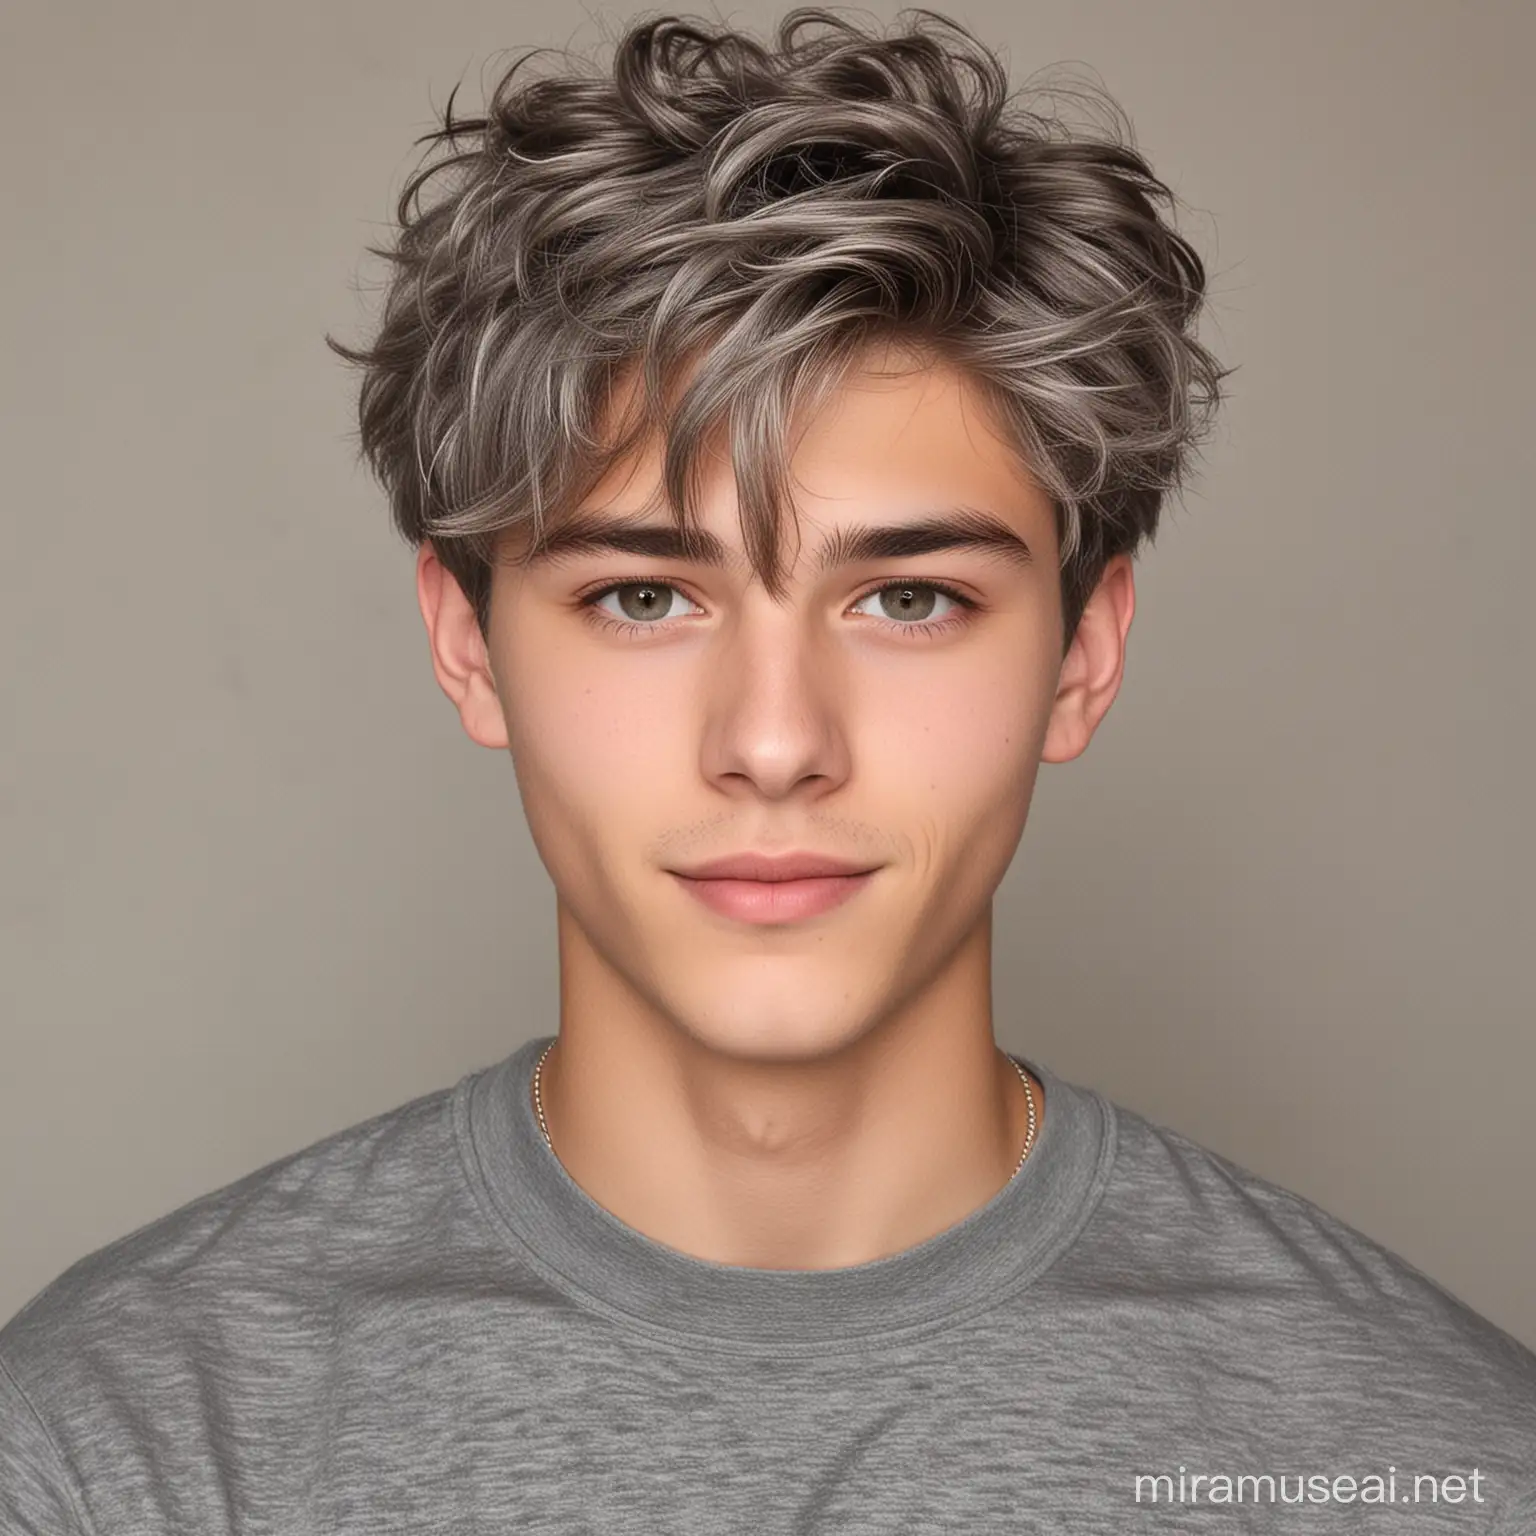 A good-looking boy. He is 18 years old. He has ash gray hair. He has a wavy middle part haircut.